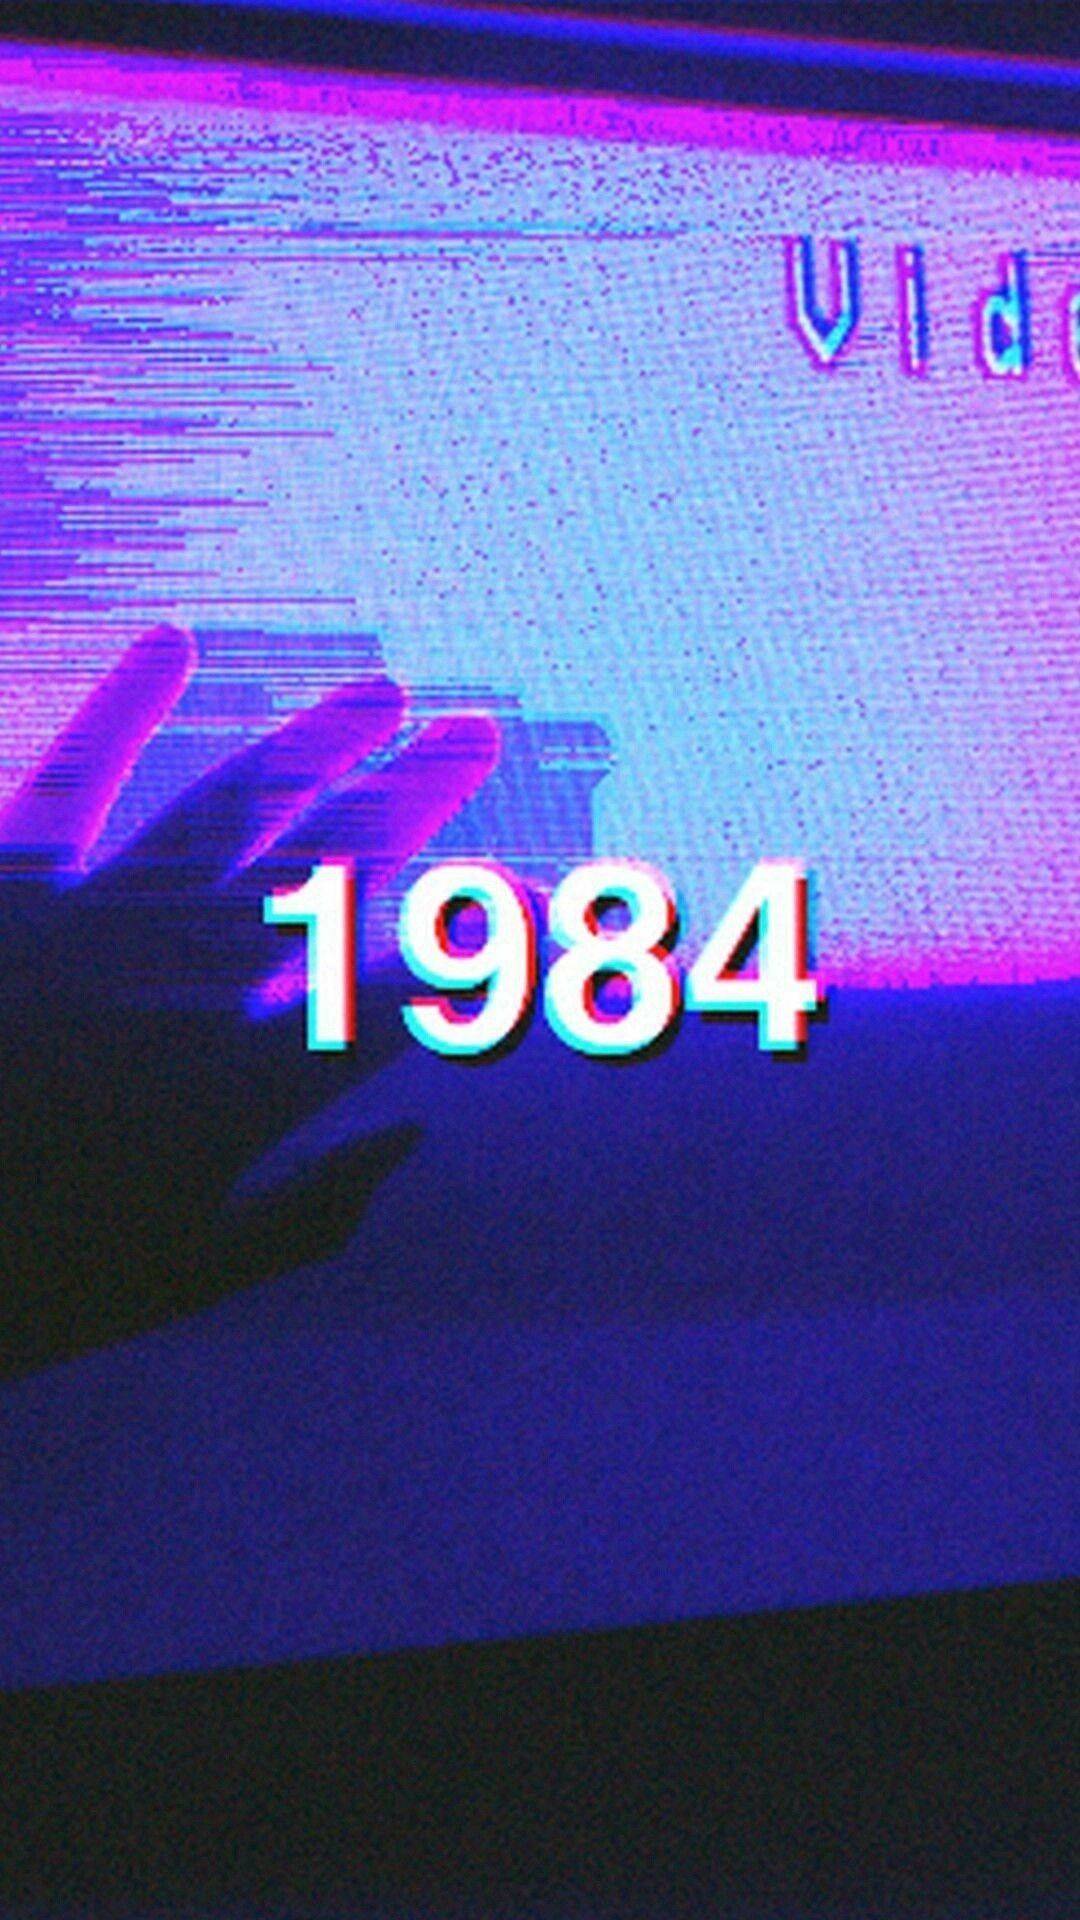 80s Aesthetic iPhone Wallpaper Free 80s Aesthetic iPhone Background